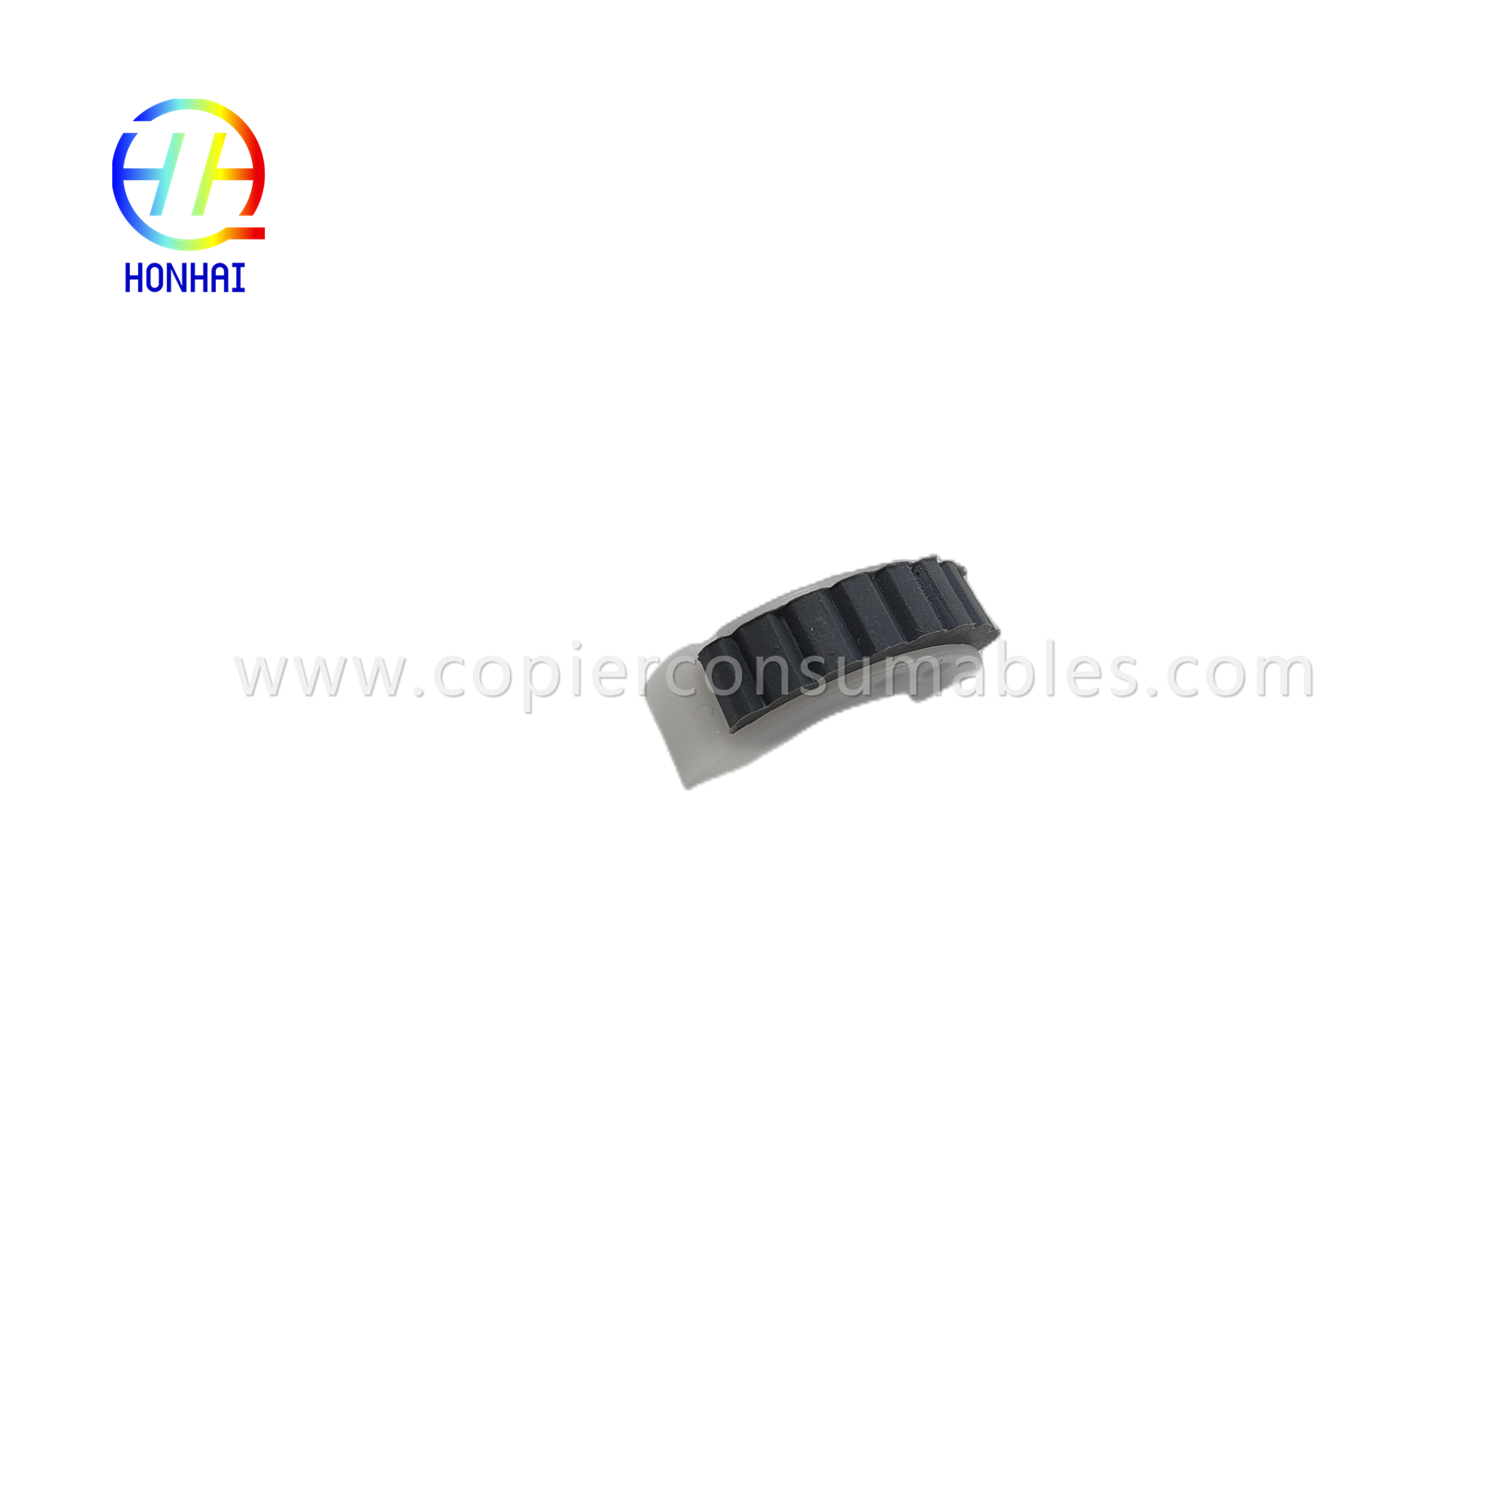 Paper Feed Separaion Pickup Roller for Canon iR 2016 2018 2020 2320 1600 2318 2420 2600 FB4-9817-030 FB4-9817-000 FF6-1621-000 OEM